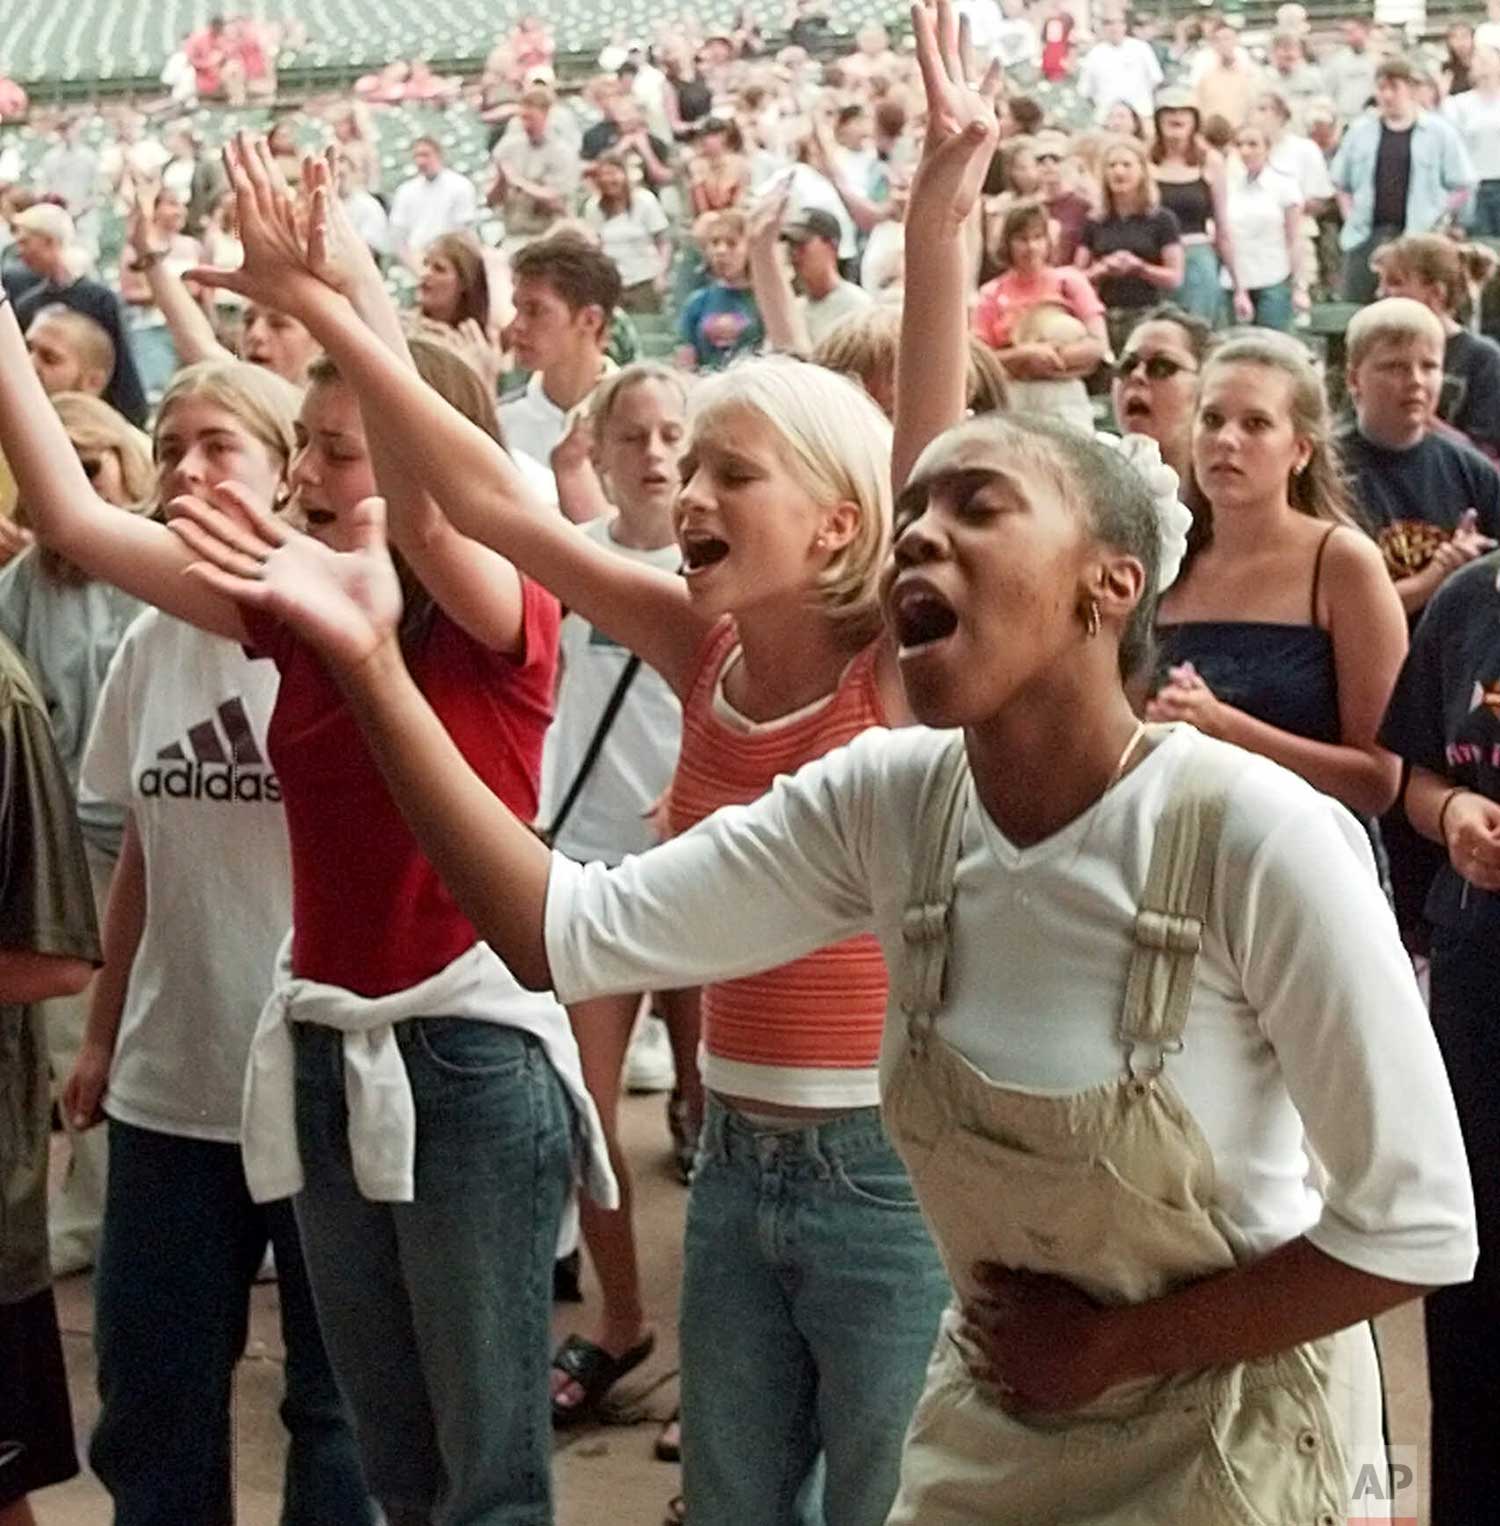  Students sing their praise to God during a youth inspirational rally "Columbine and Friends," at Fiddler's Green Amphitheater in Englewood, Colo., Saturday night, August 14, 1999, in the wake of the Columbine High School shooting. (AP Photo/Ed Andri